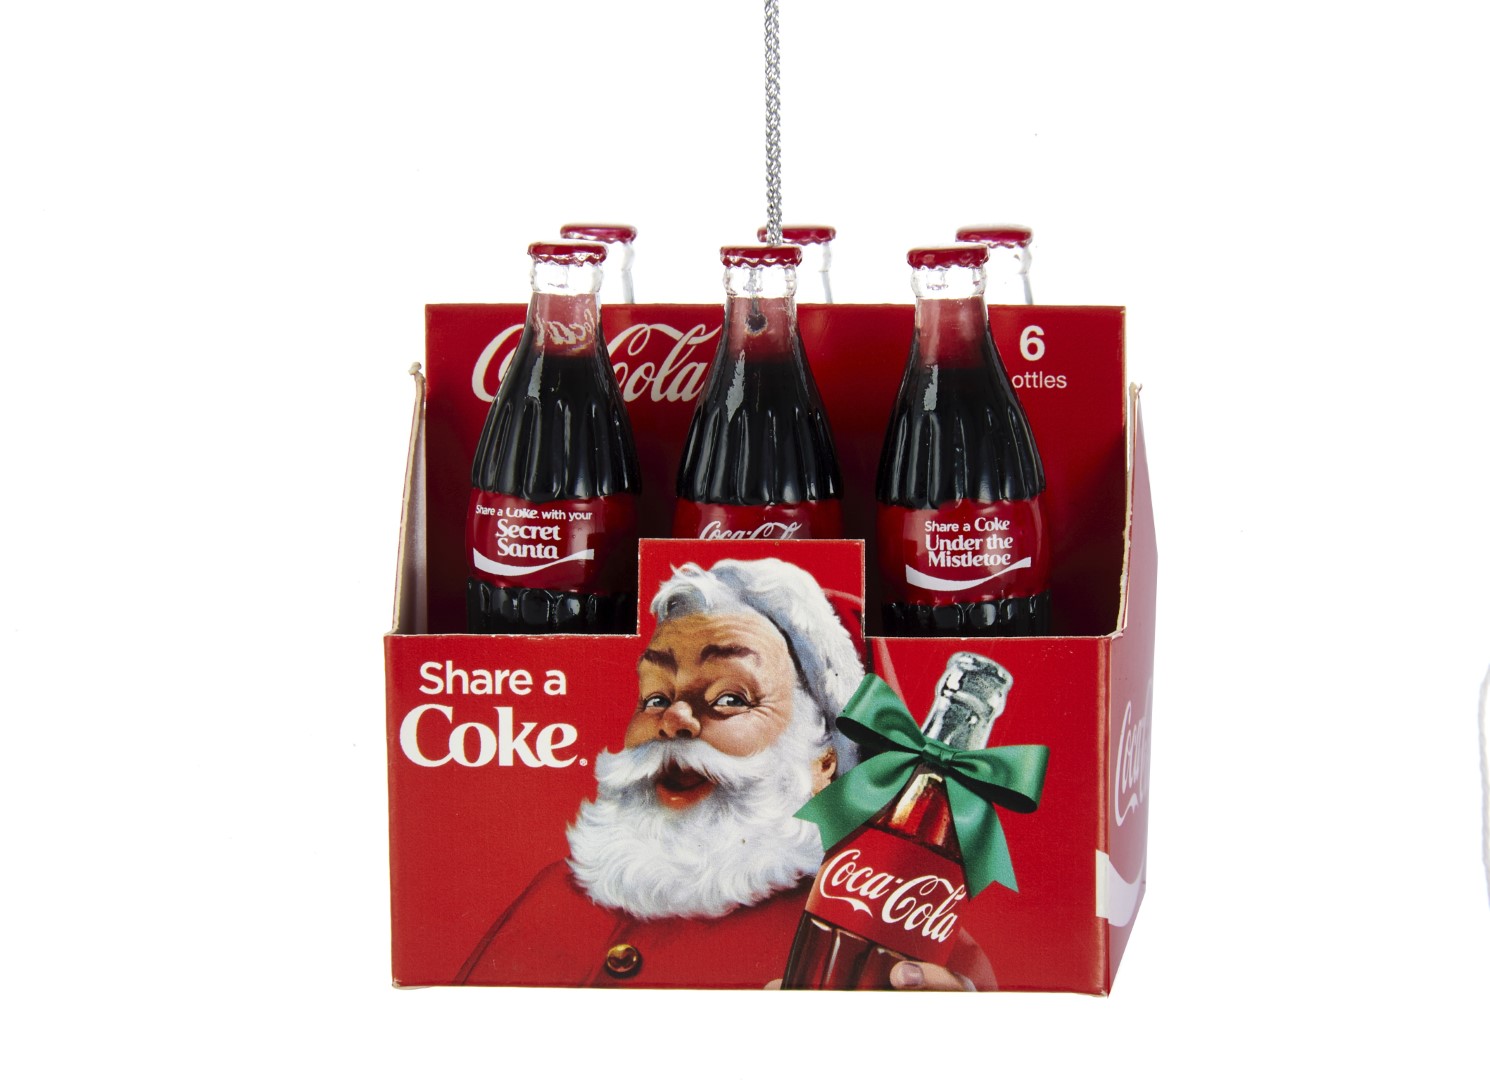 Coca-Cola 6 Pack Resin 2625 Inch